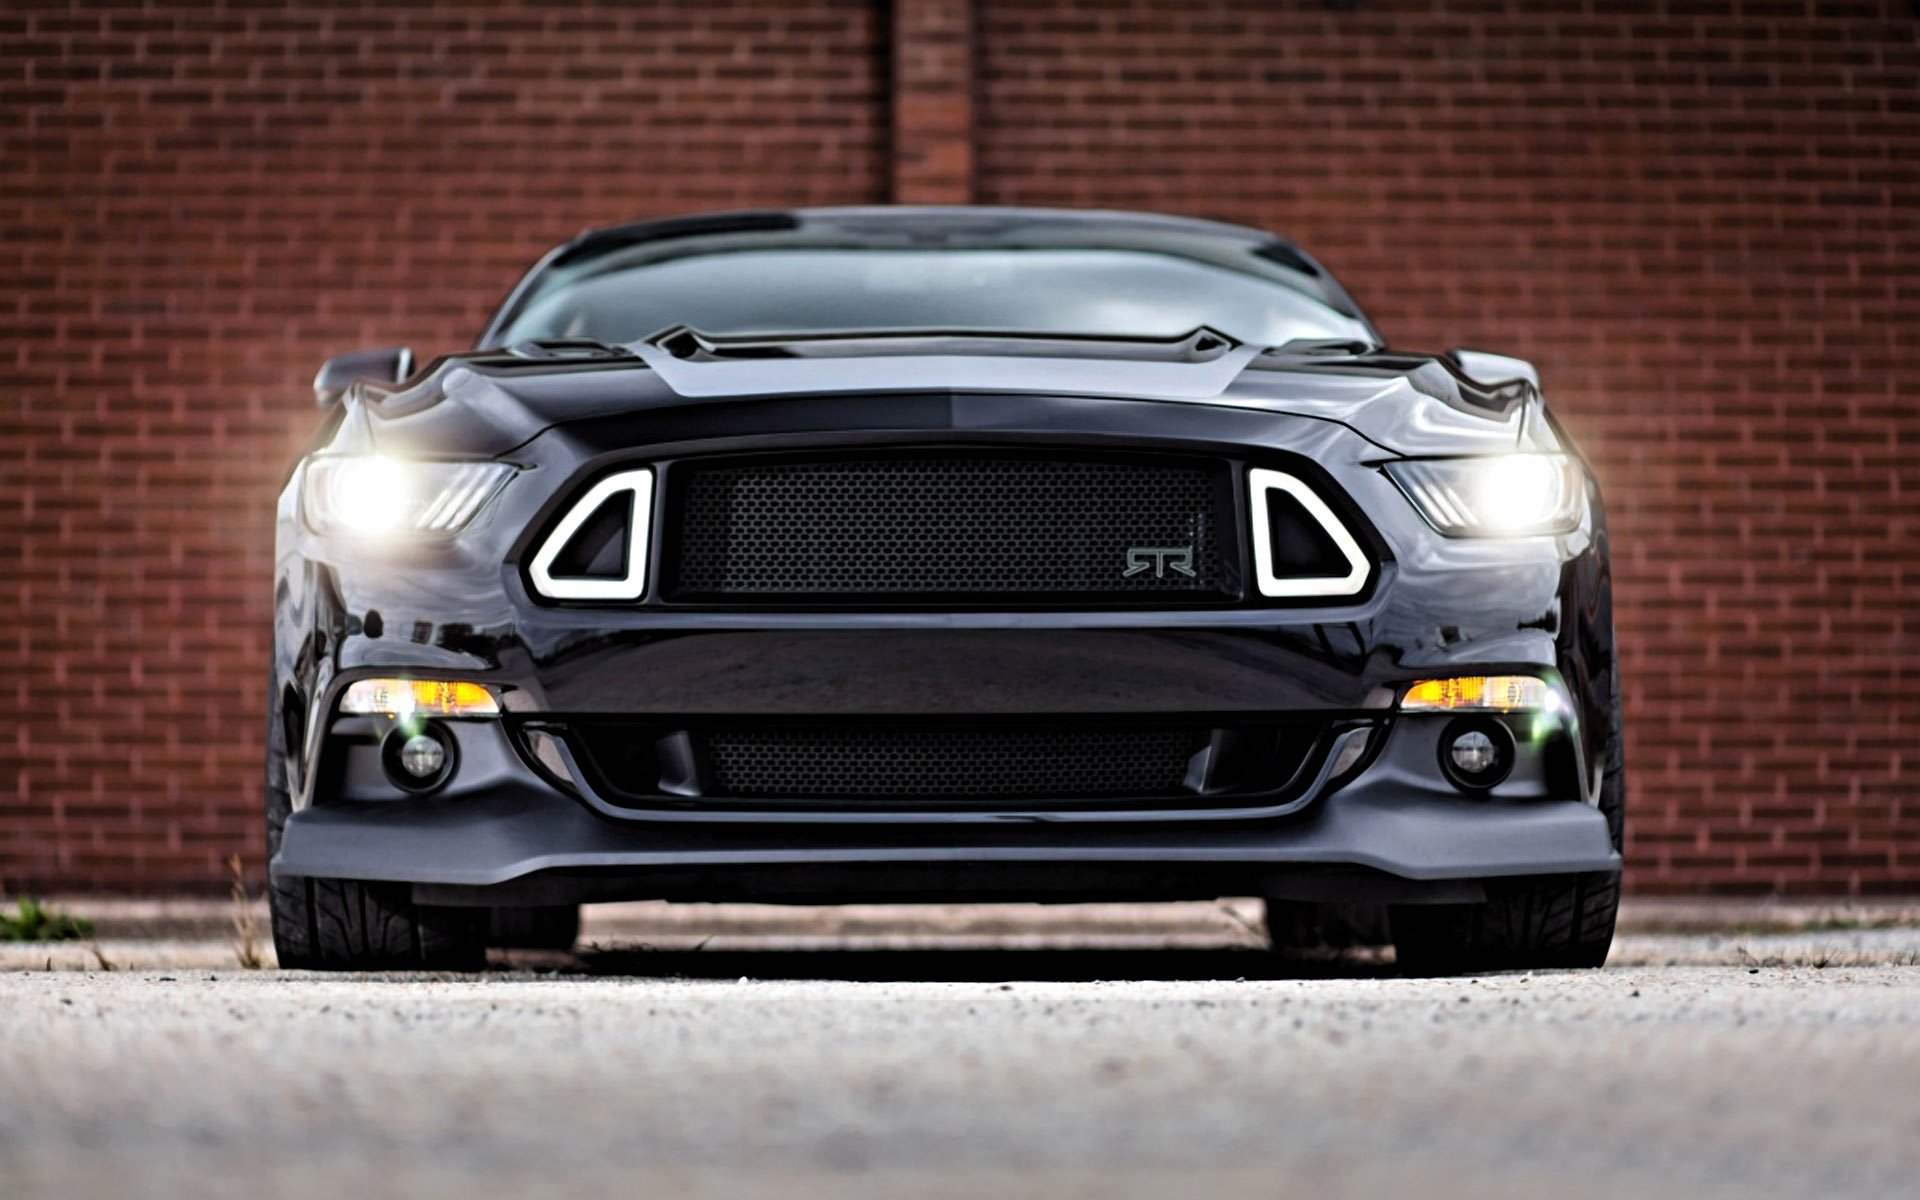 2015, Ford, Mustang, Rtr, Special, Concept, Supercar, Muscle, Usa, 3840x2400 02 Wallpaper